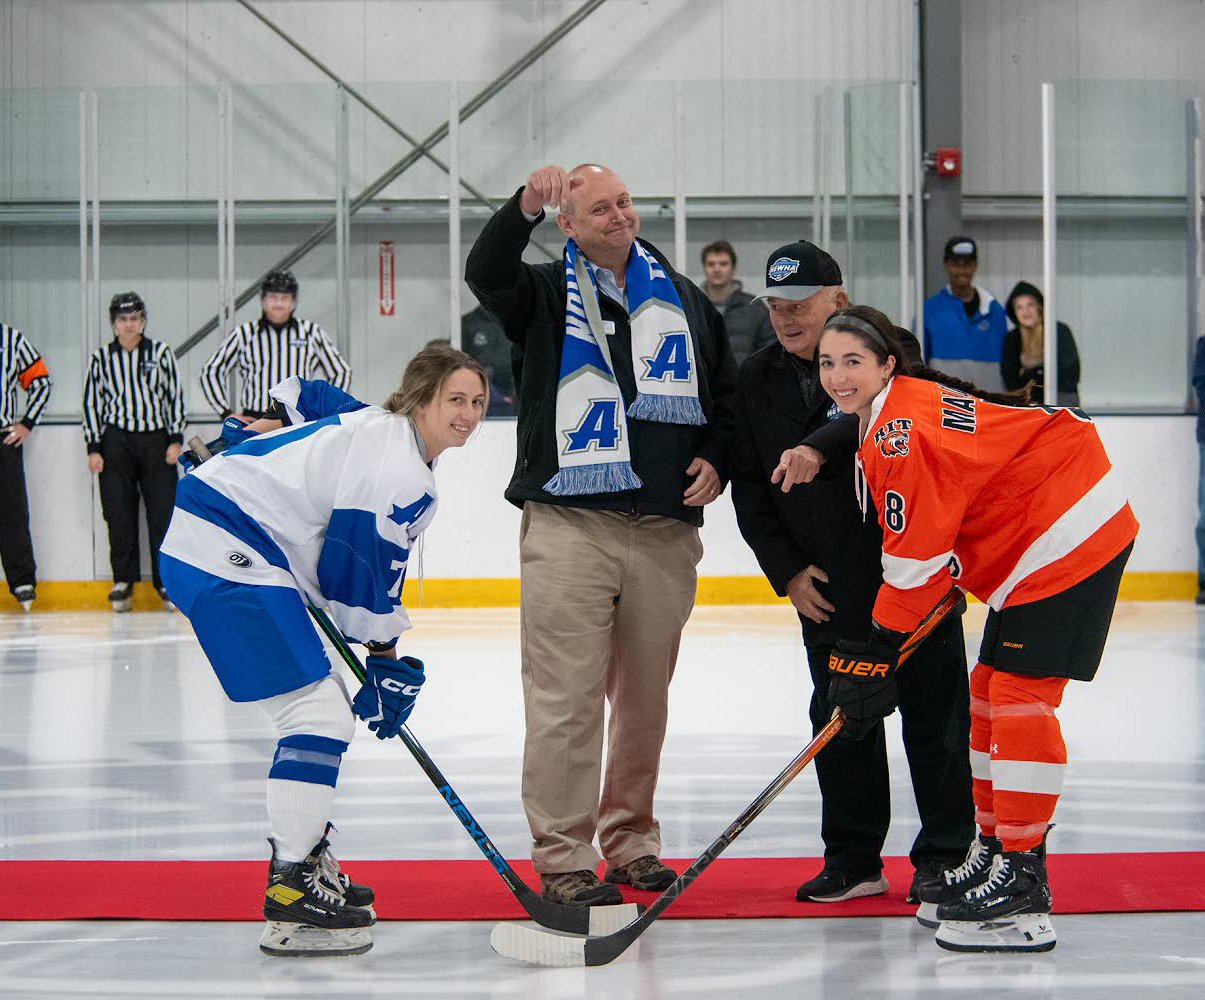 President Greg Weiner drops the ceremonious puck to start the first game in AU women's ice hockey history